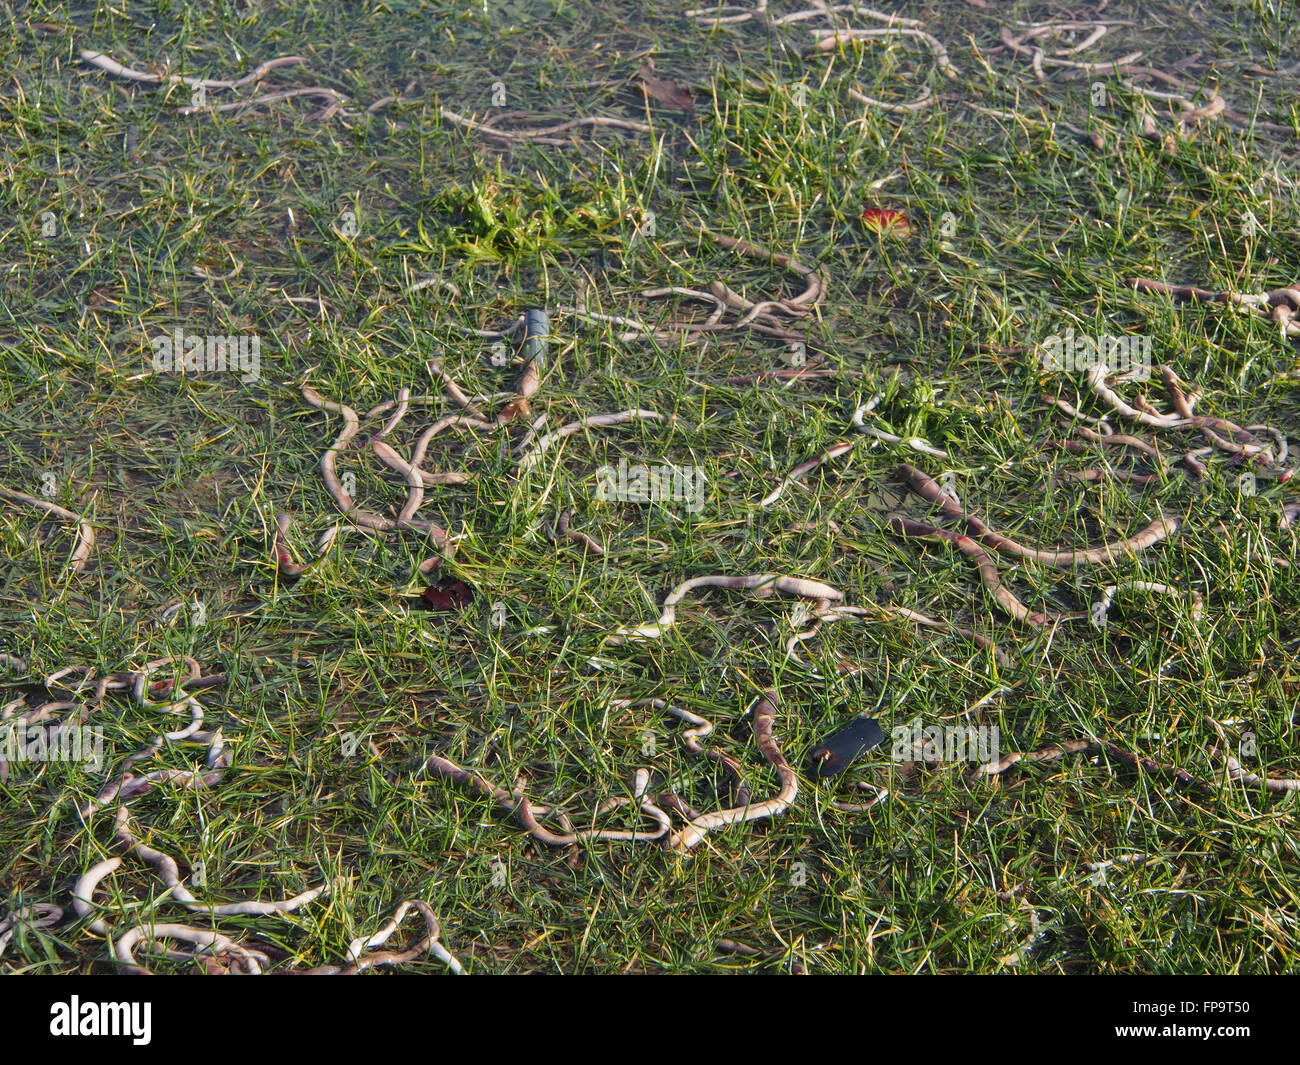 A multitude of Earthworms surface on a flooded field after heavy rainfall Stock Photo